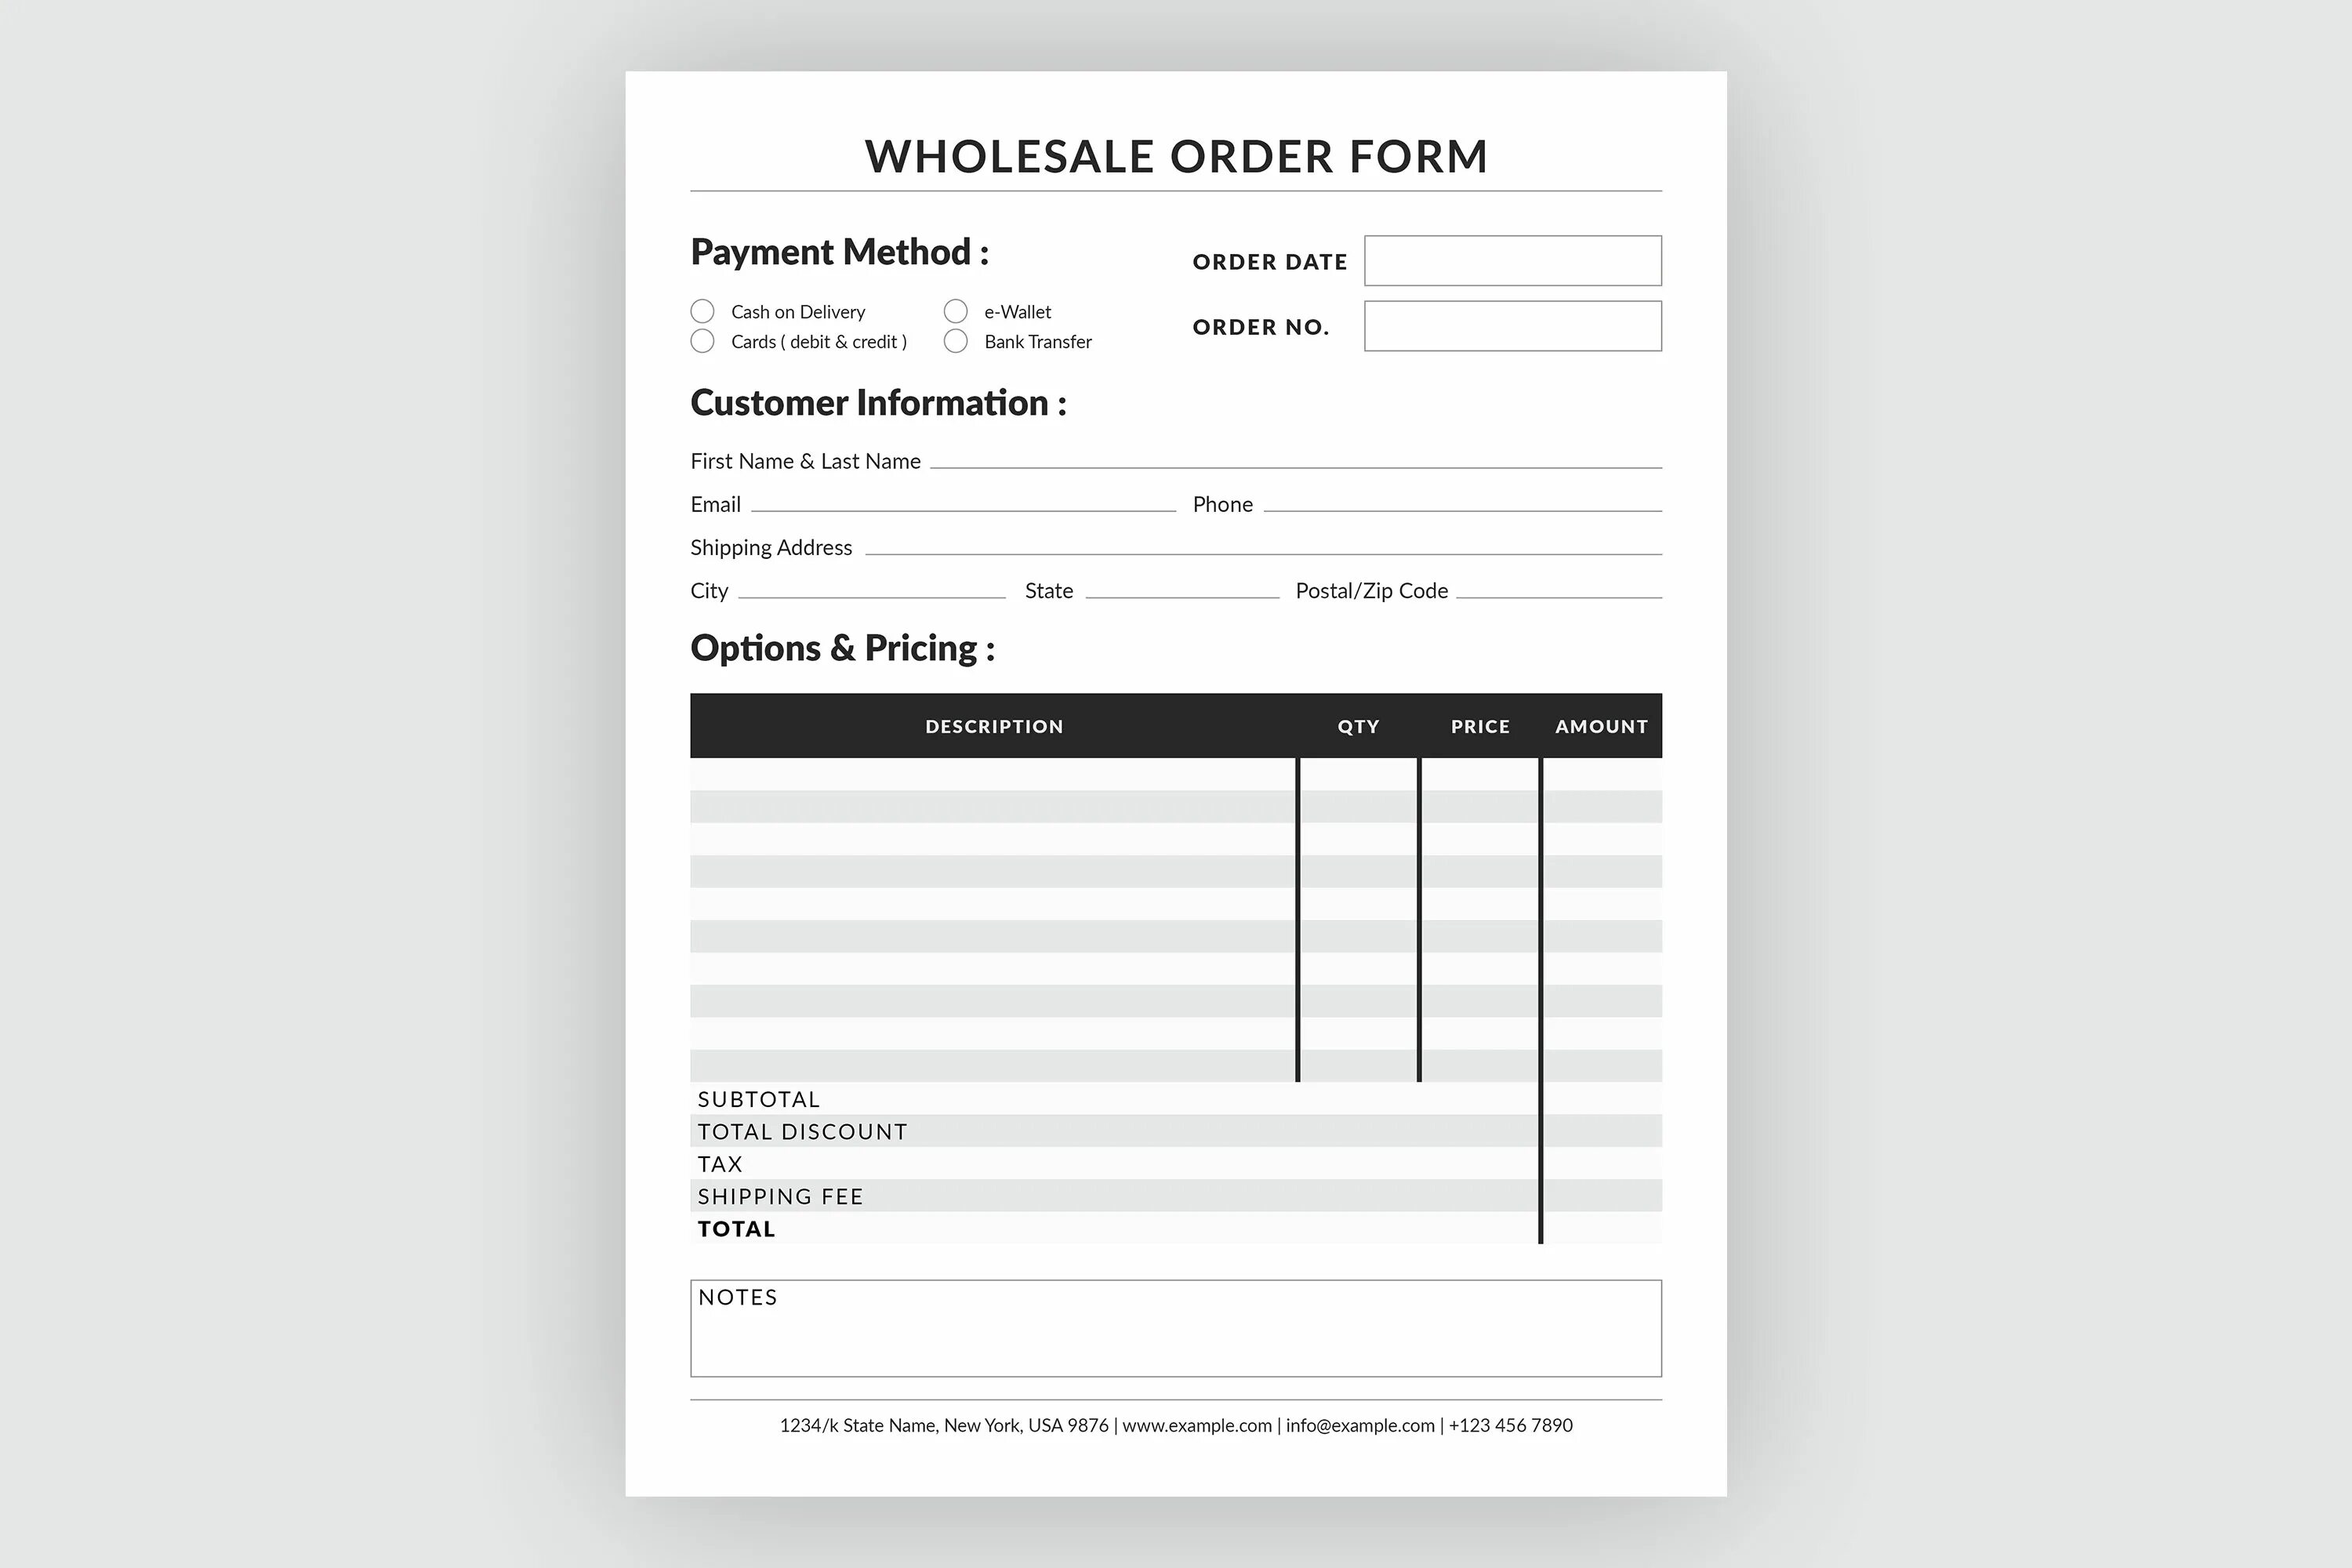 Form new part. Form. Product order form. Order form Template. Бланк макет.